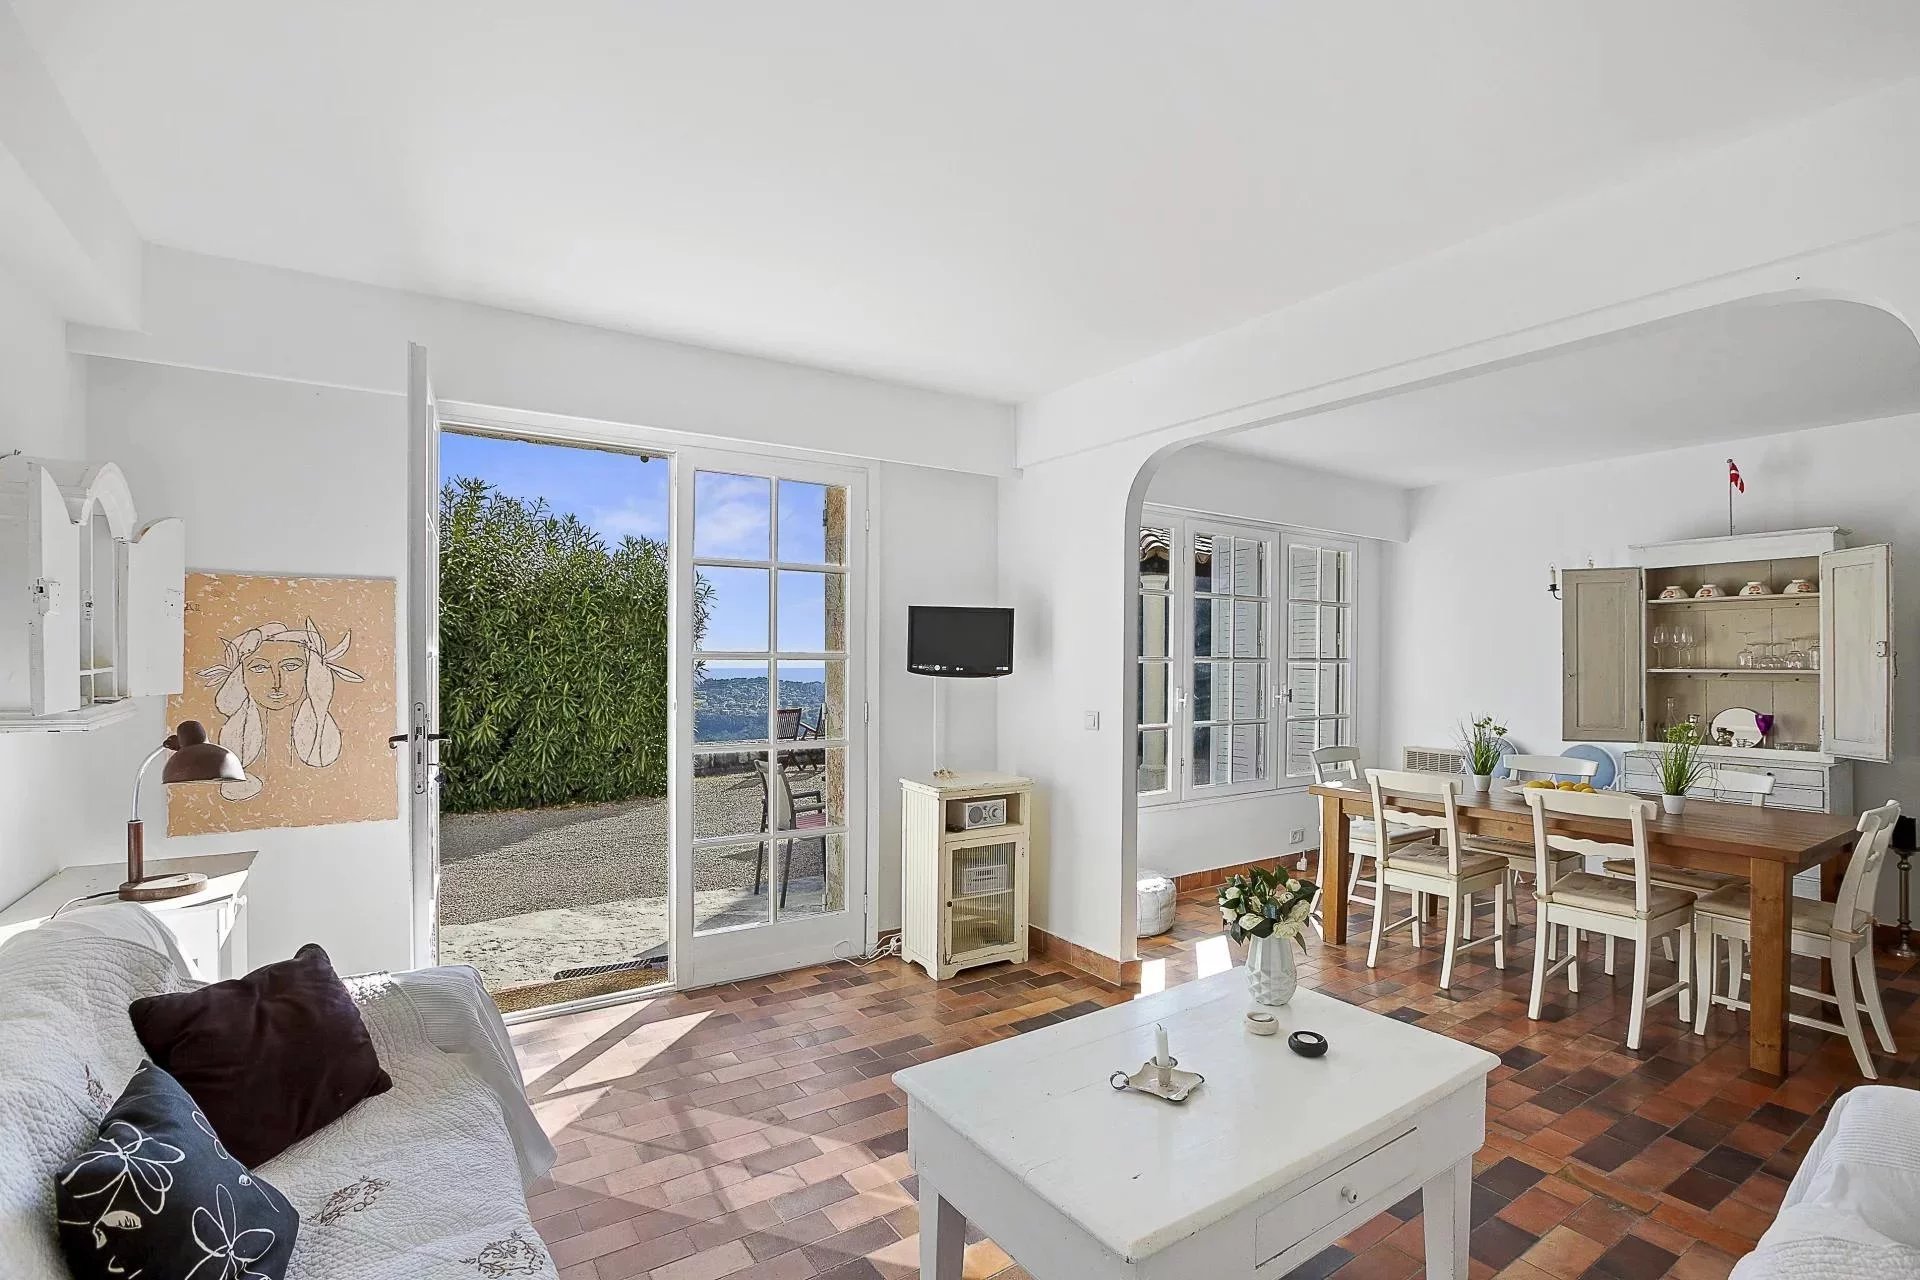 Stonehouse with sea view – Vence